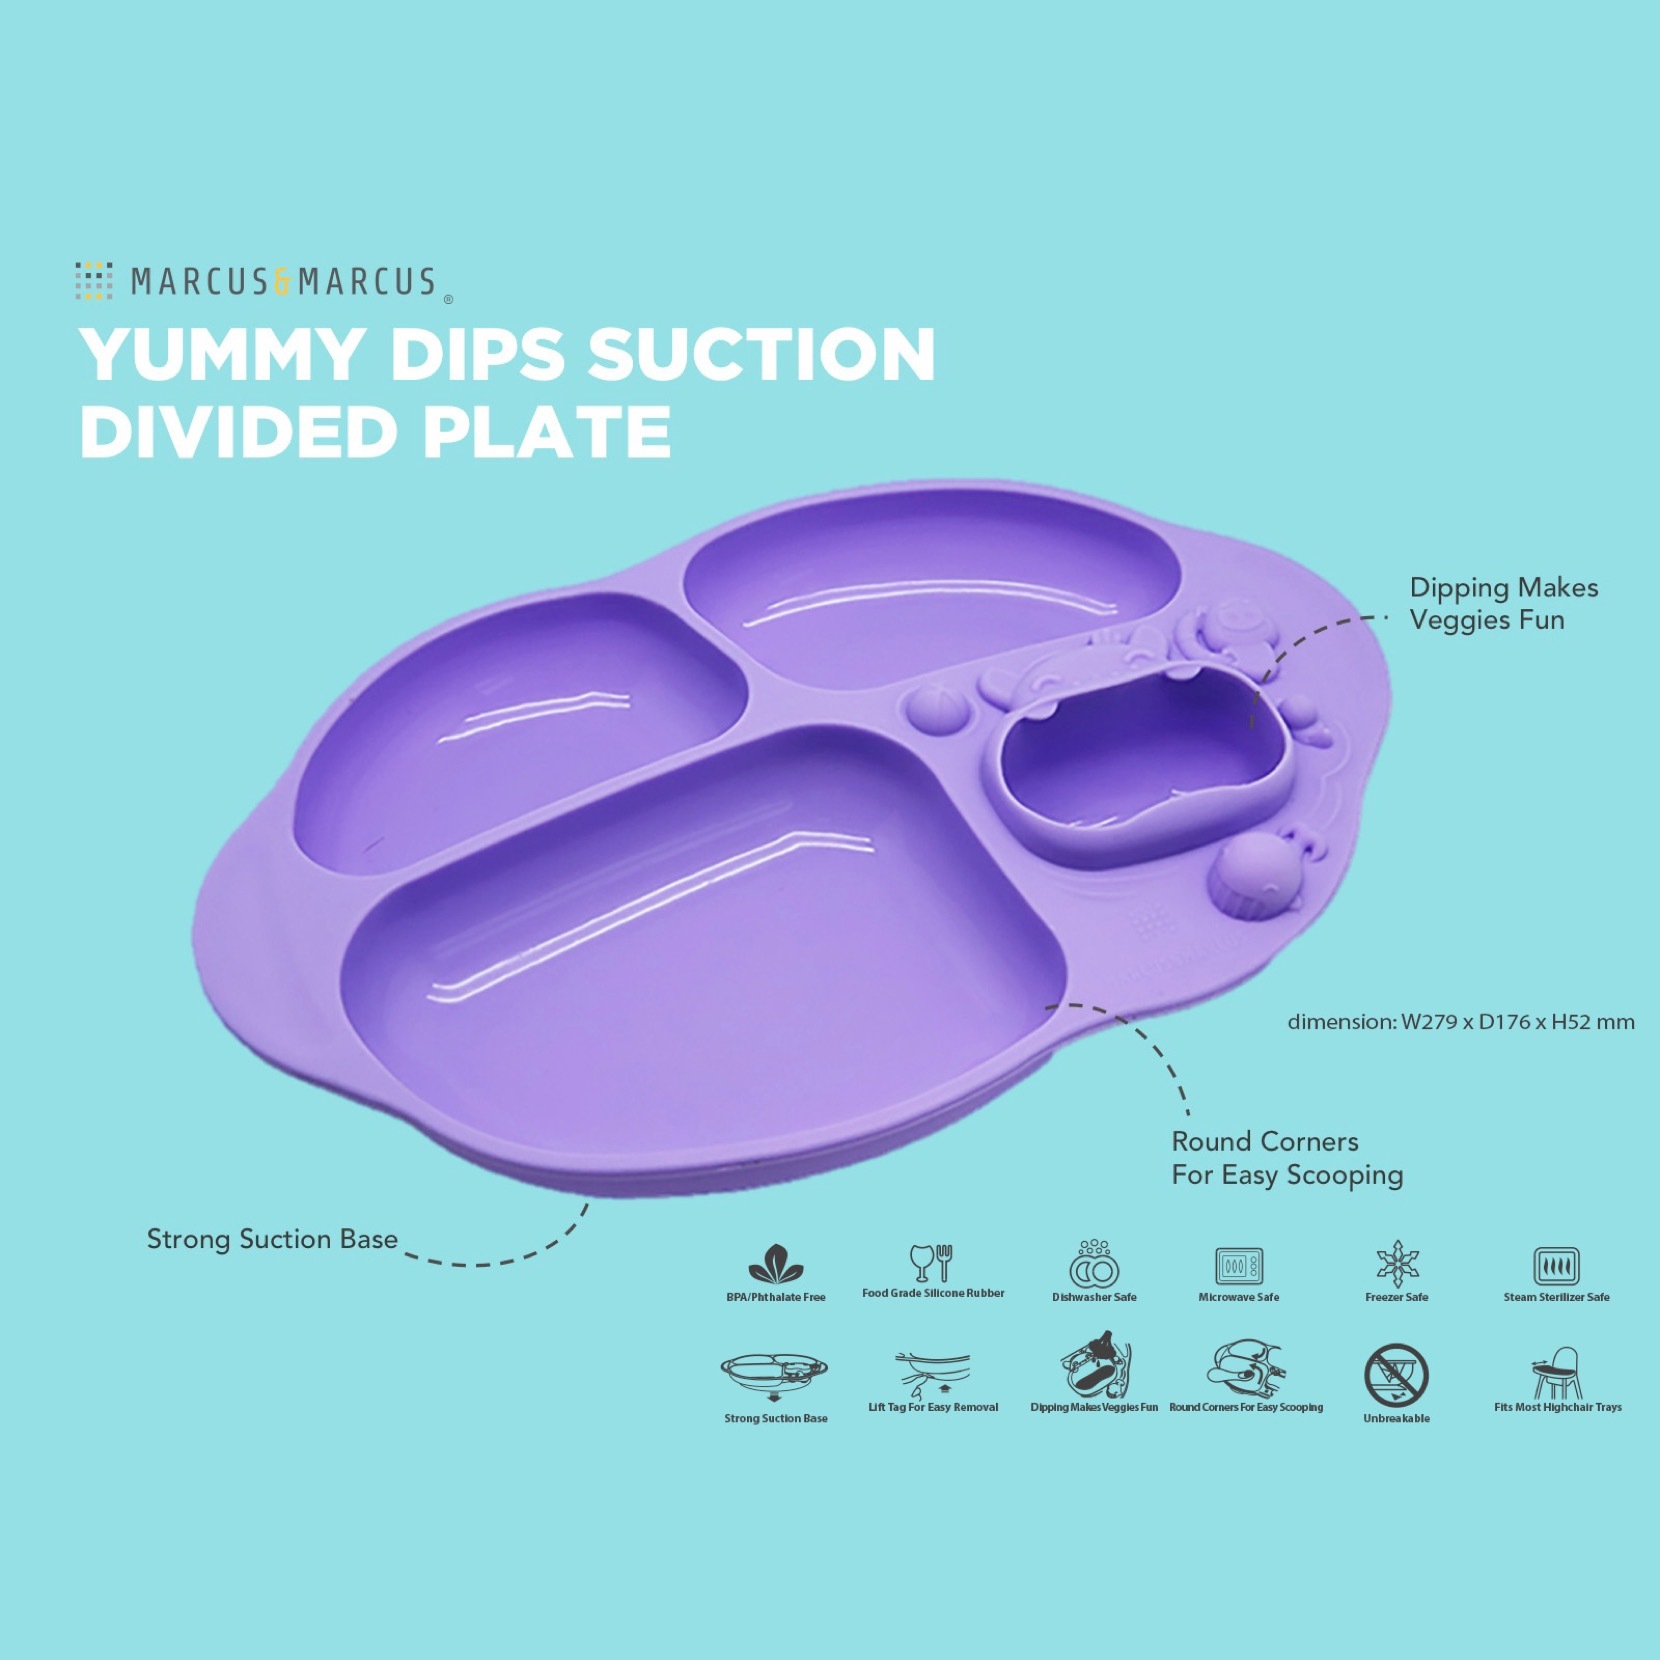 Marcus and Marcus Yummy Dips Suction Divided Plate 加拿大 marcus & marcus 动物乐园吸盘分隔餐盘碟